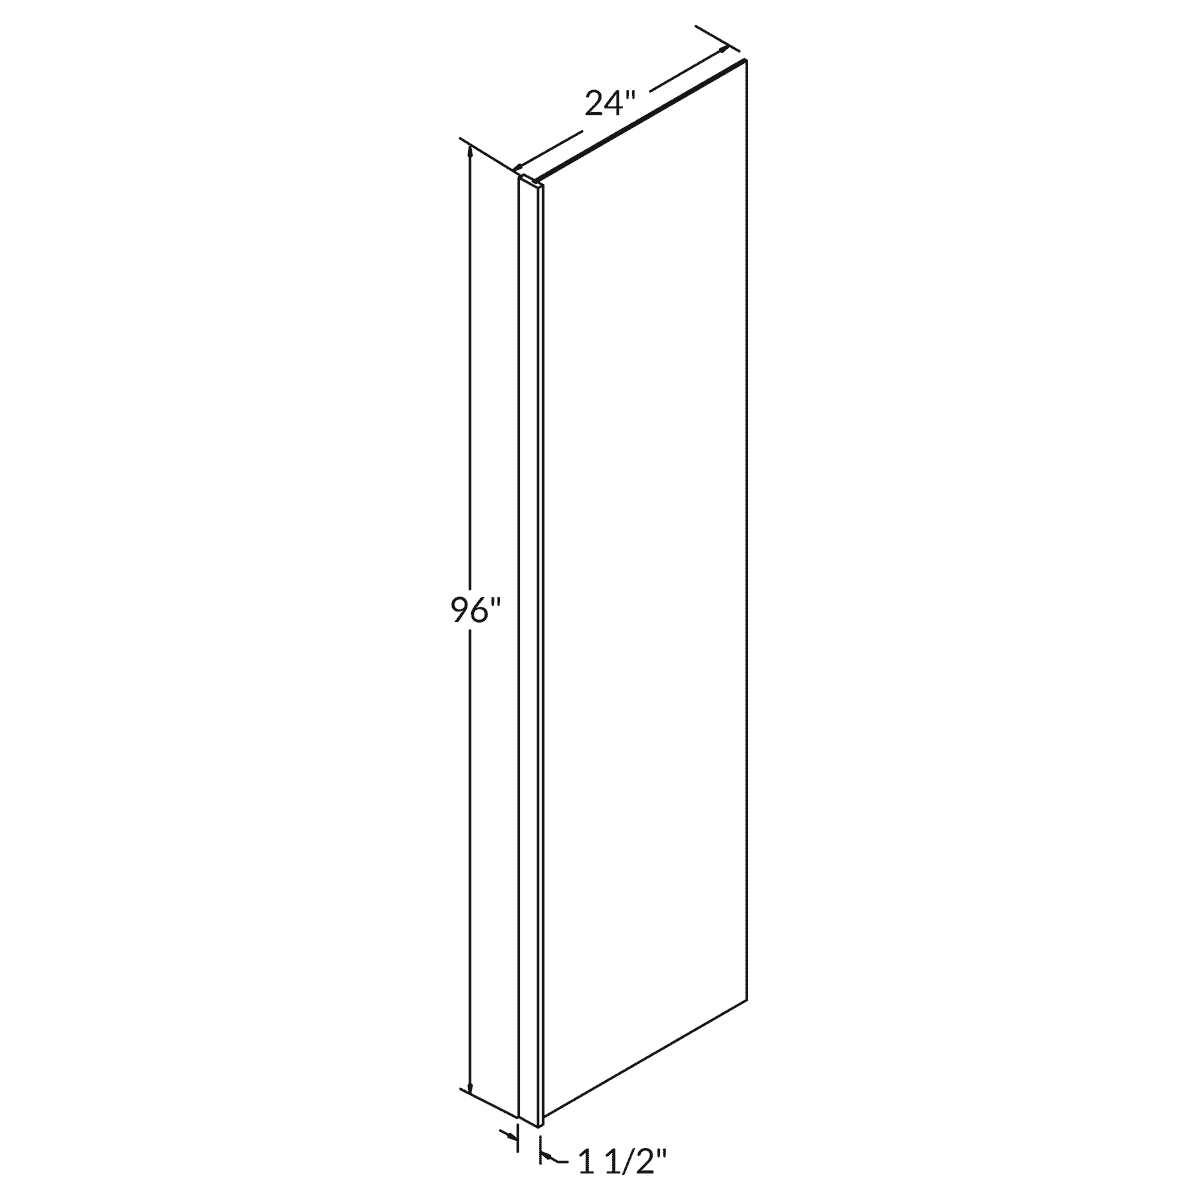 96 H X 24 D End Panel With 1 1 2 Stile For White Shaker Cabinetry